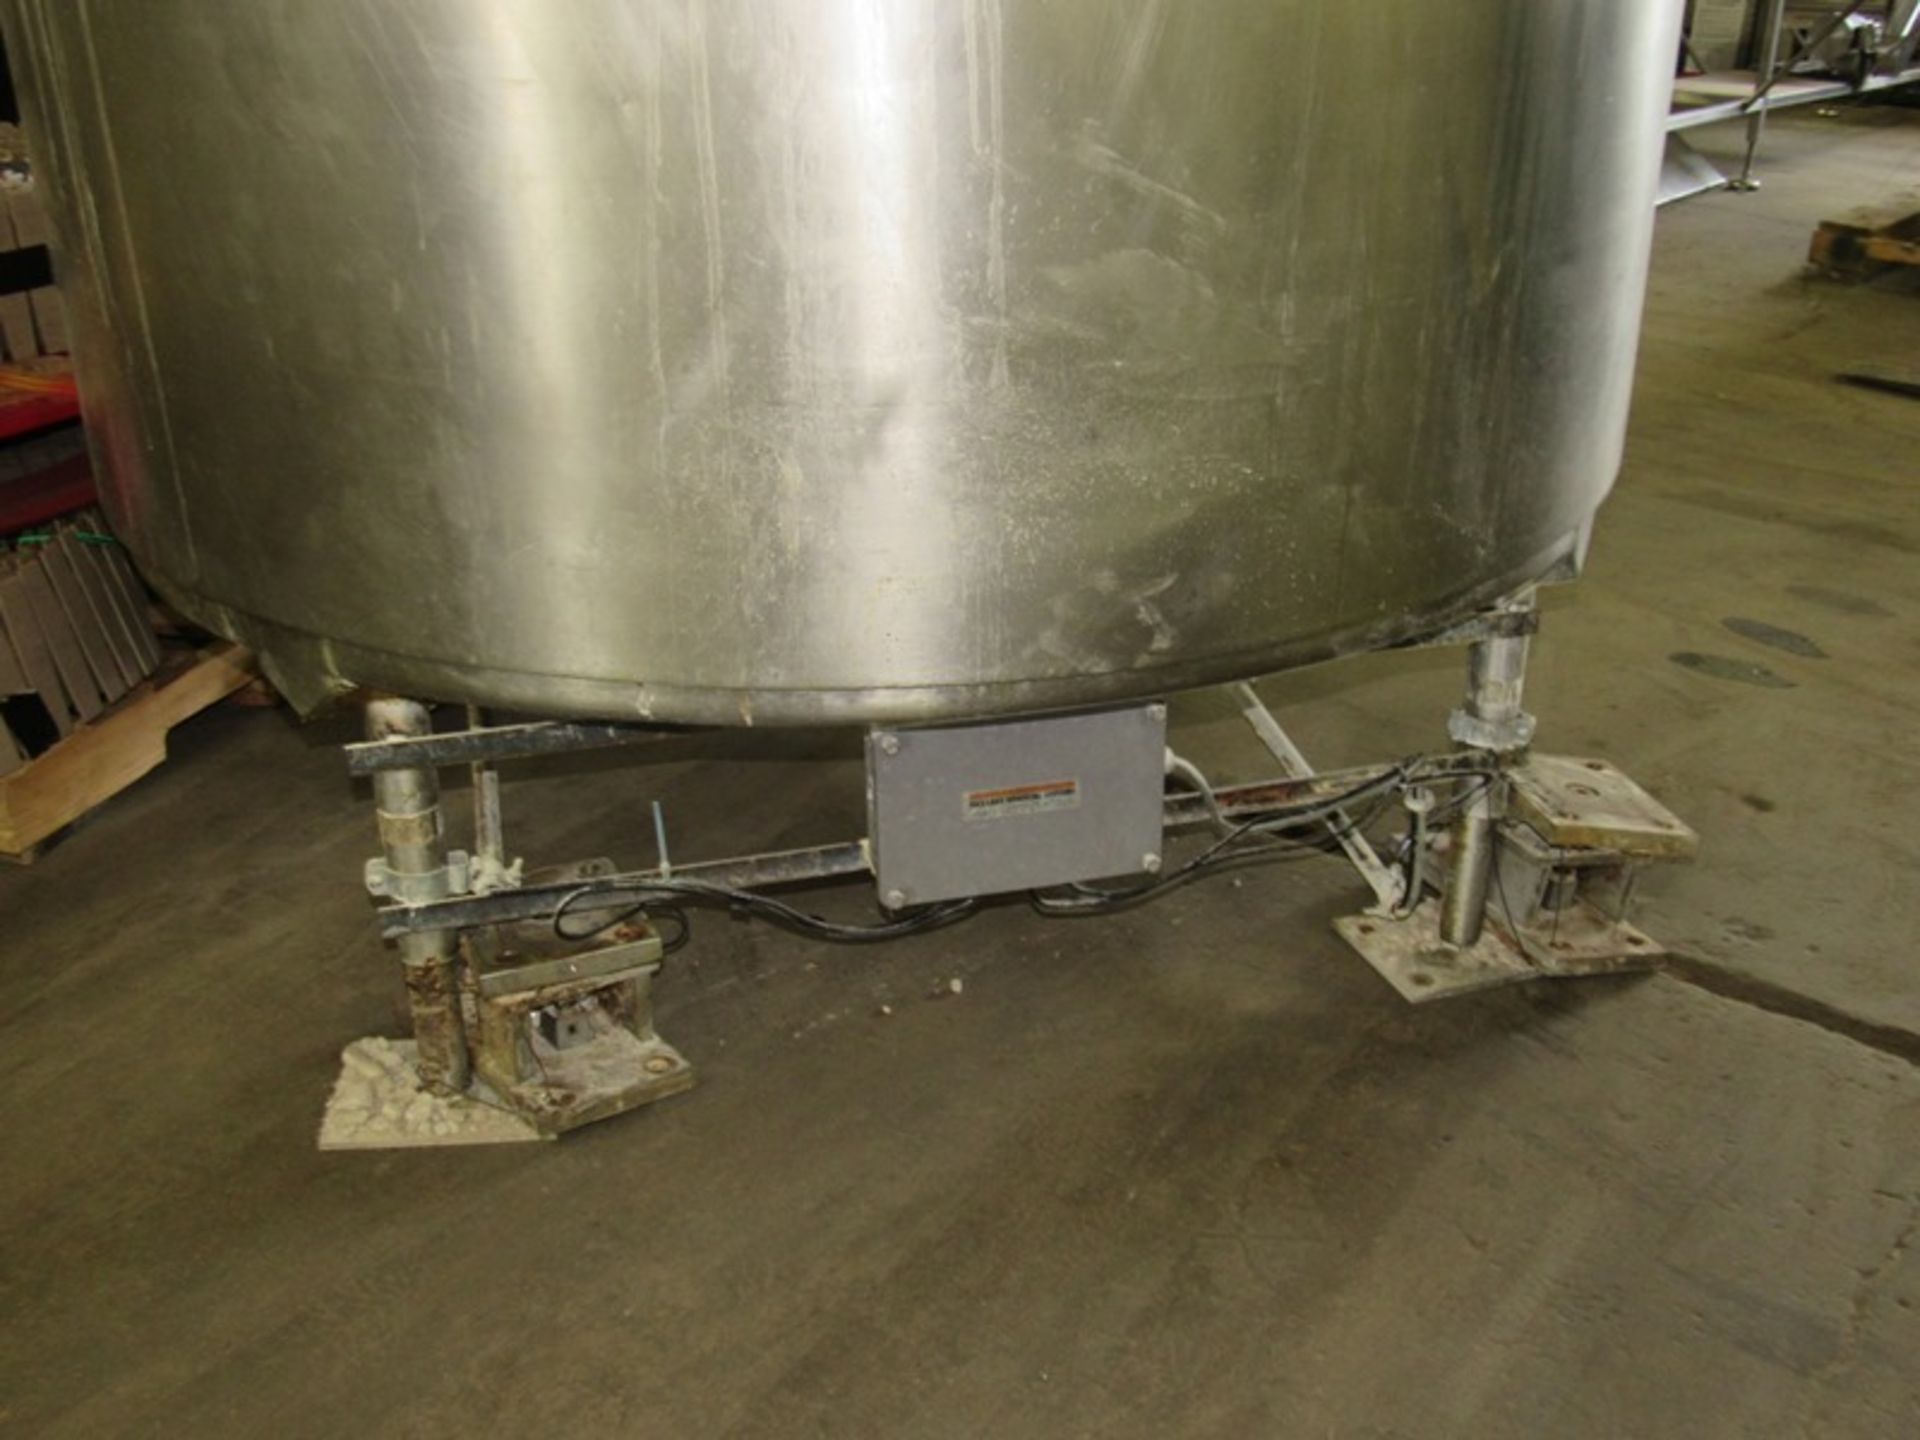 Groen Mdl. 800 Gal. Stainless Steel Jacketed Tank, 800 gallon capacity, 5' Dia. X 64" Deep with - Image 8 of 11